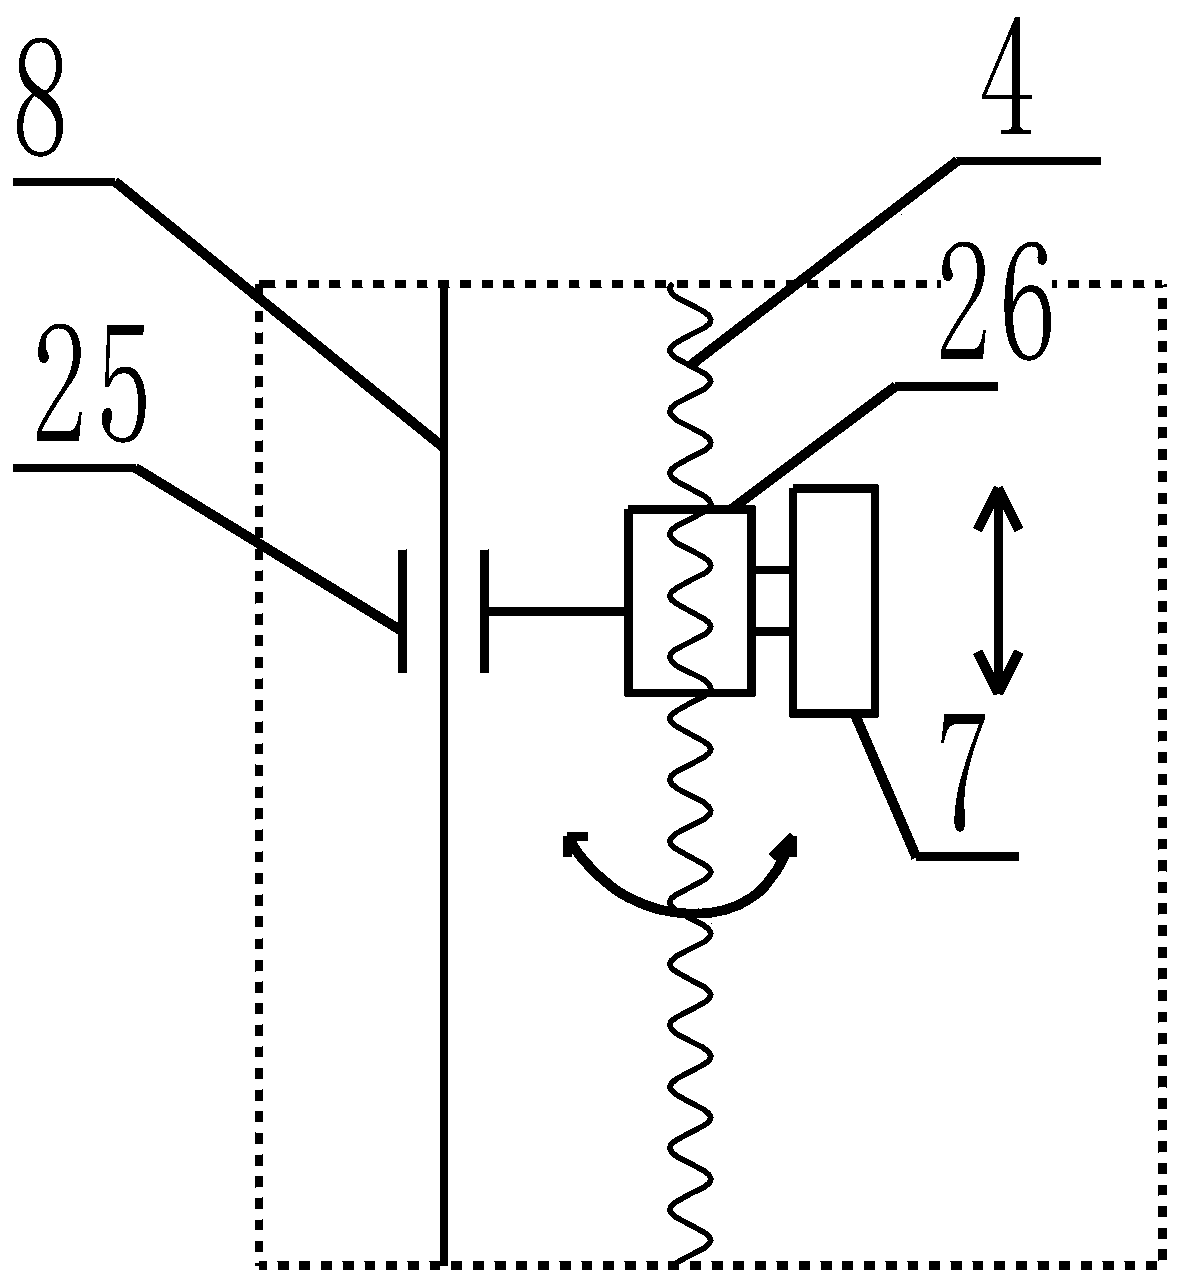 Cable winding and unwinding device